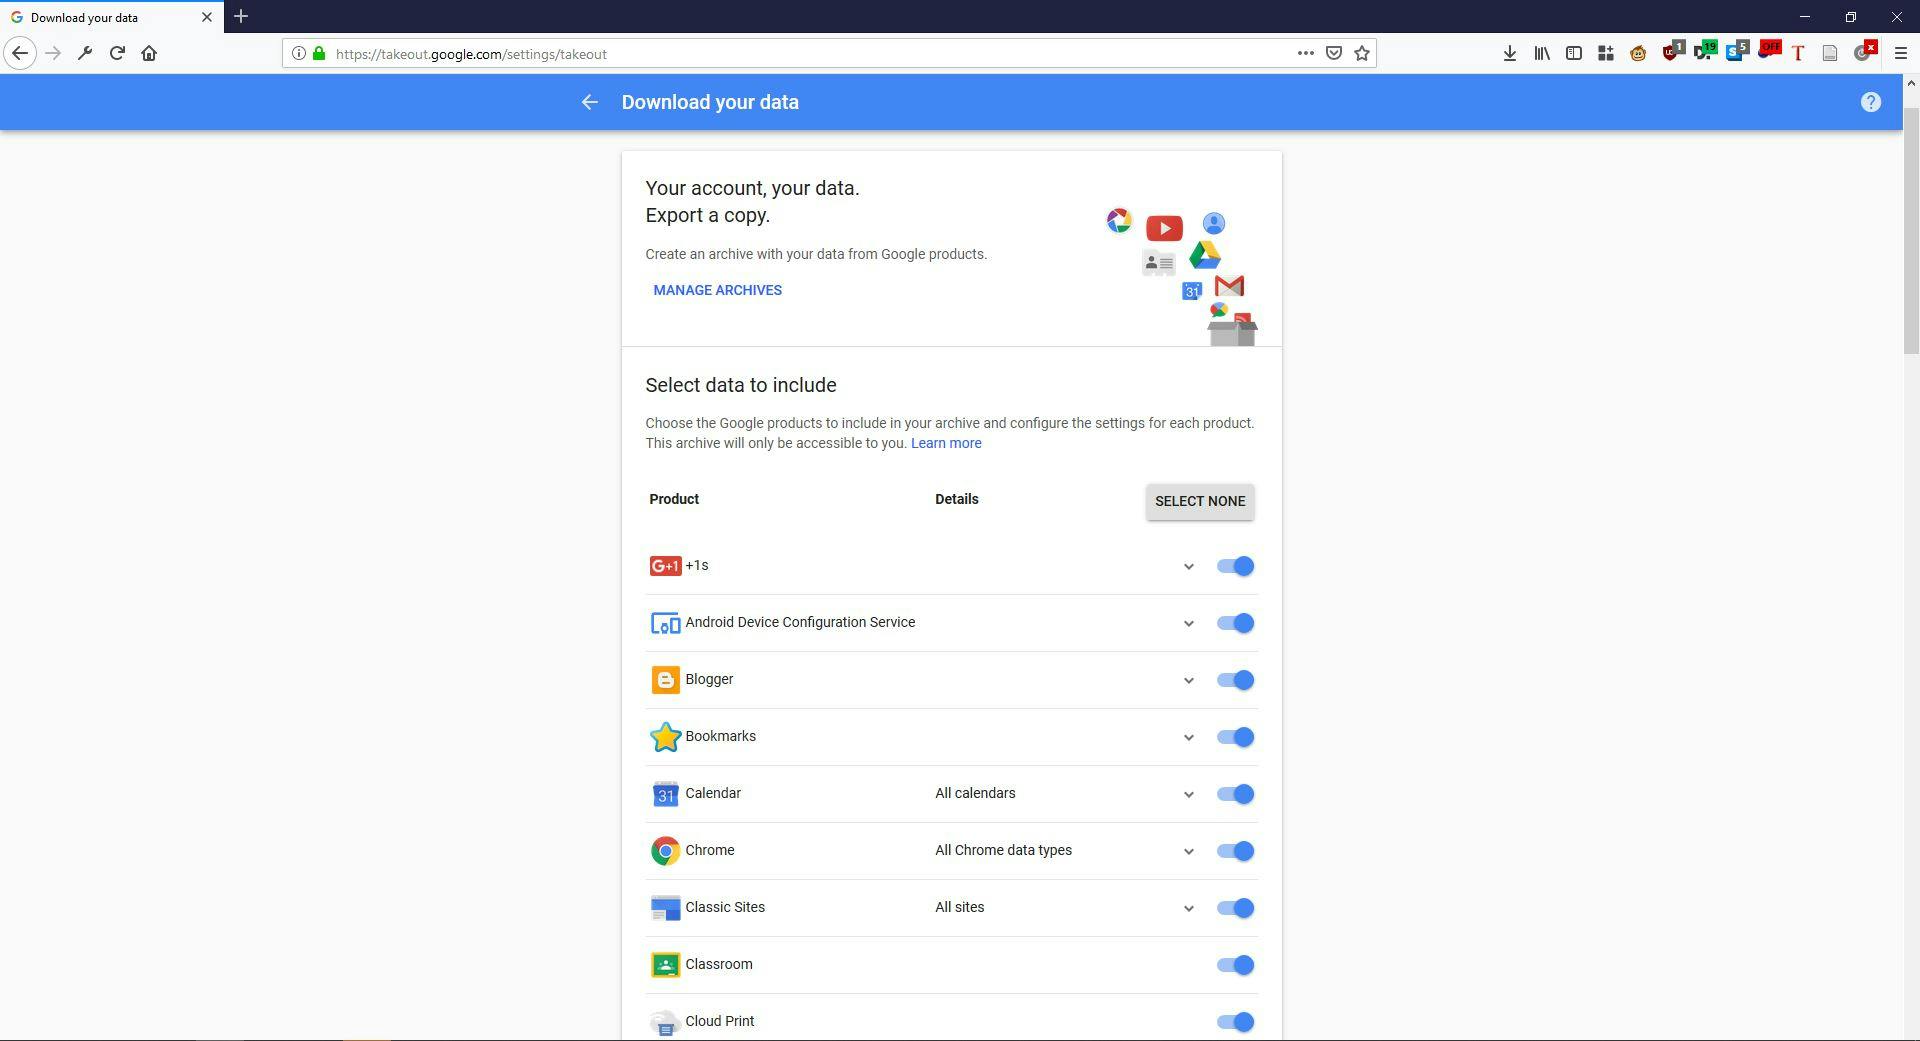 A screenshot of the Google Takeout web page.